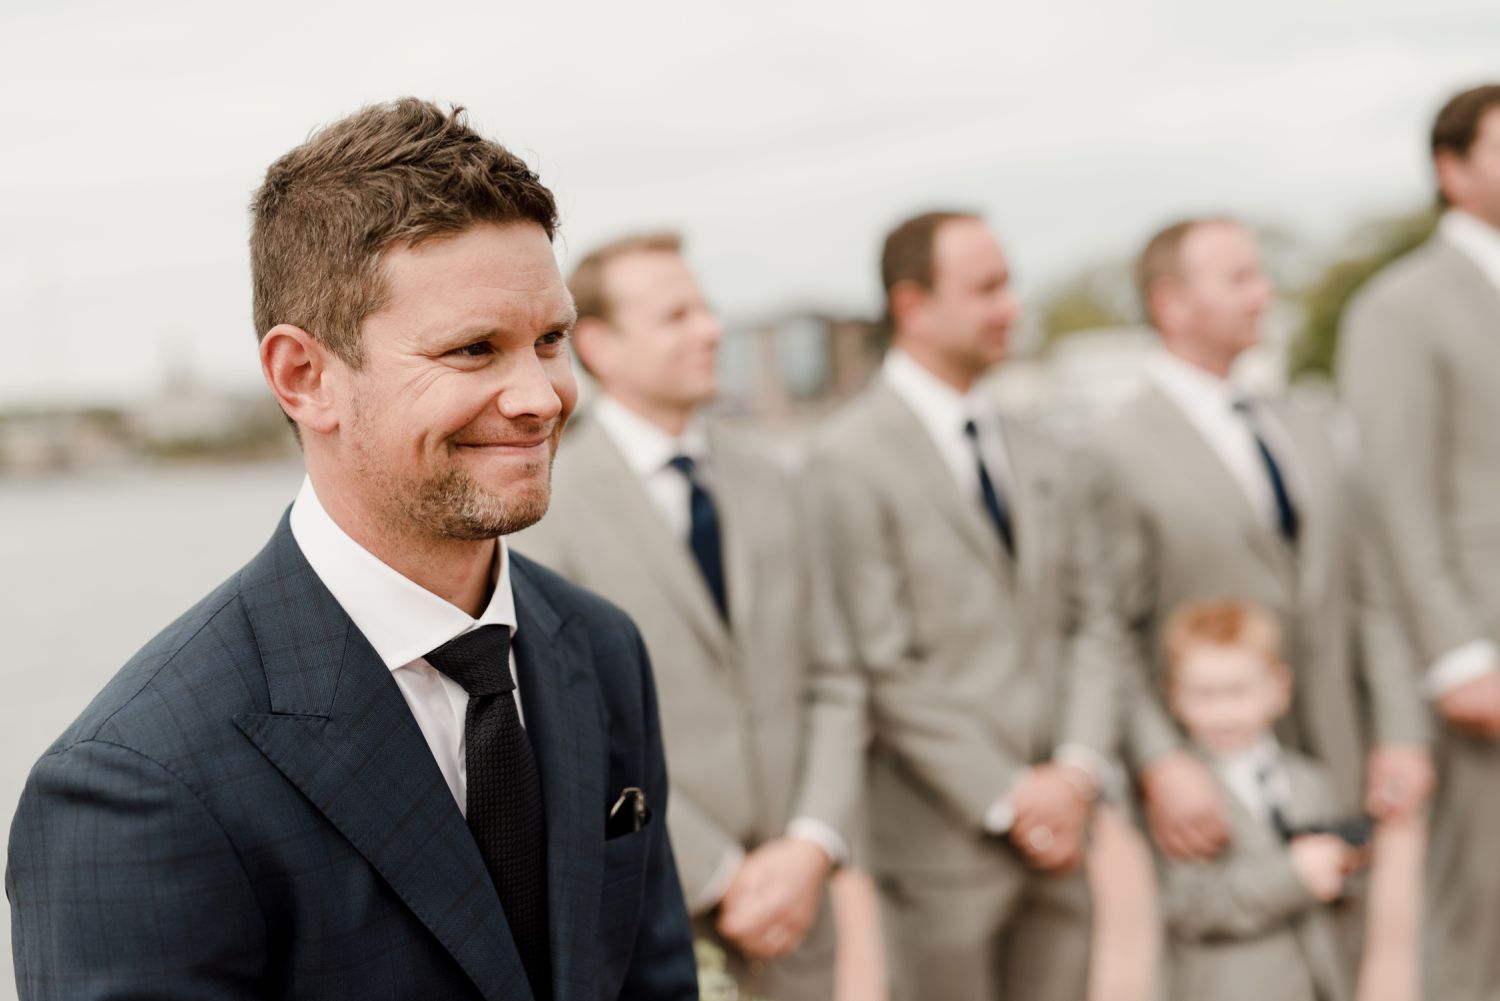 Lakeside Kenora wedding, fall wedding in Ontario, photographed by Vanessa Renae Photography, a Winnipeg and Kenora wedding photographer